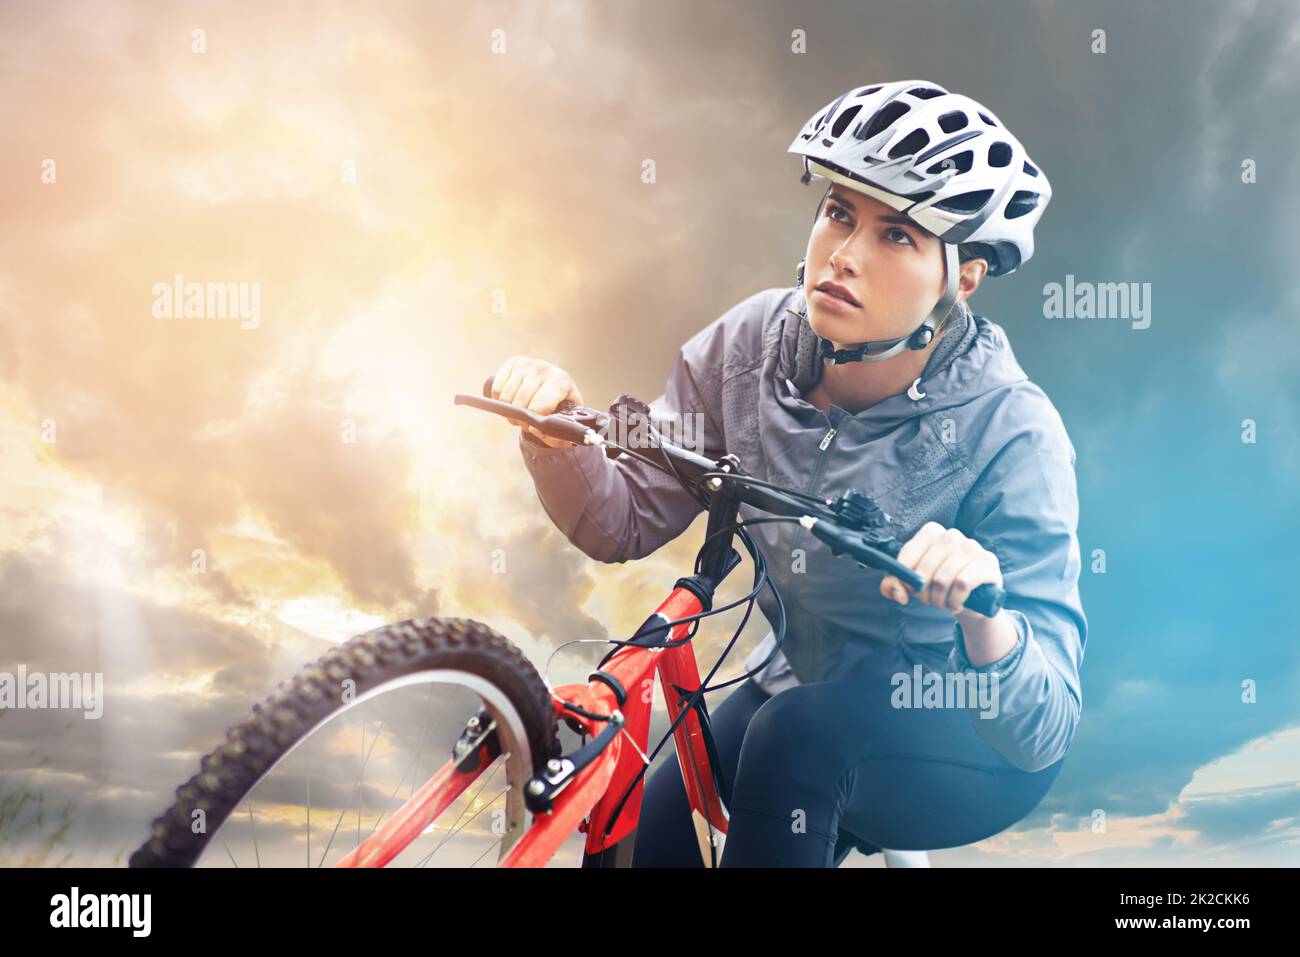 Bicycles may change, but cycling is timeless. Shot of a female mountain biker out for an early morning ride. Stock Photo